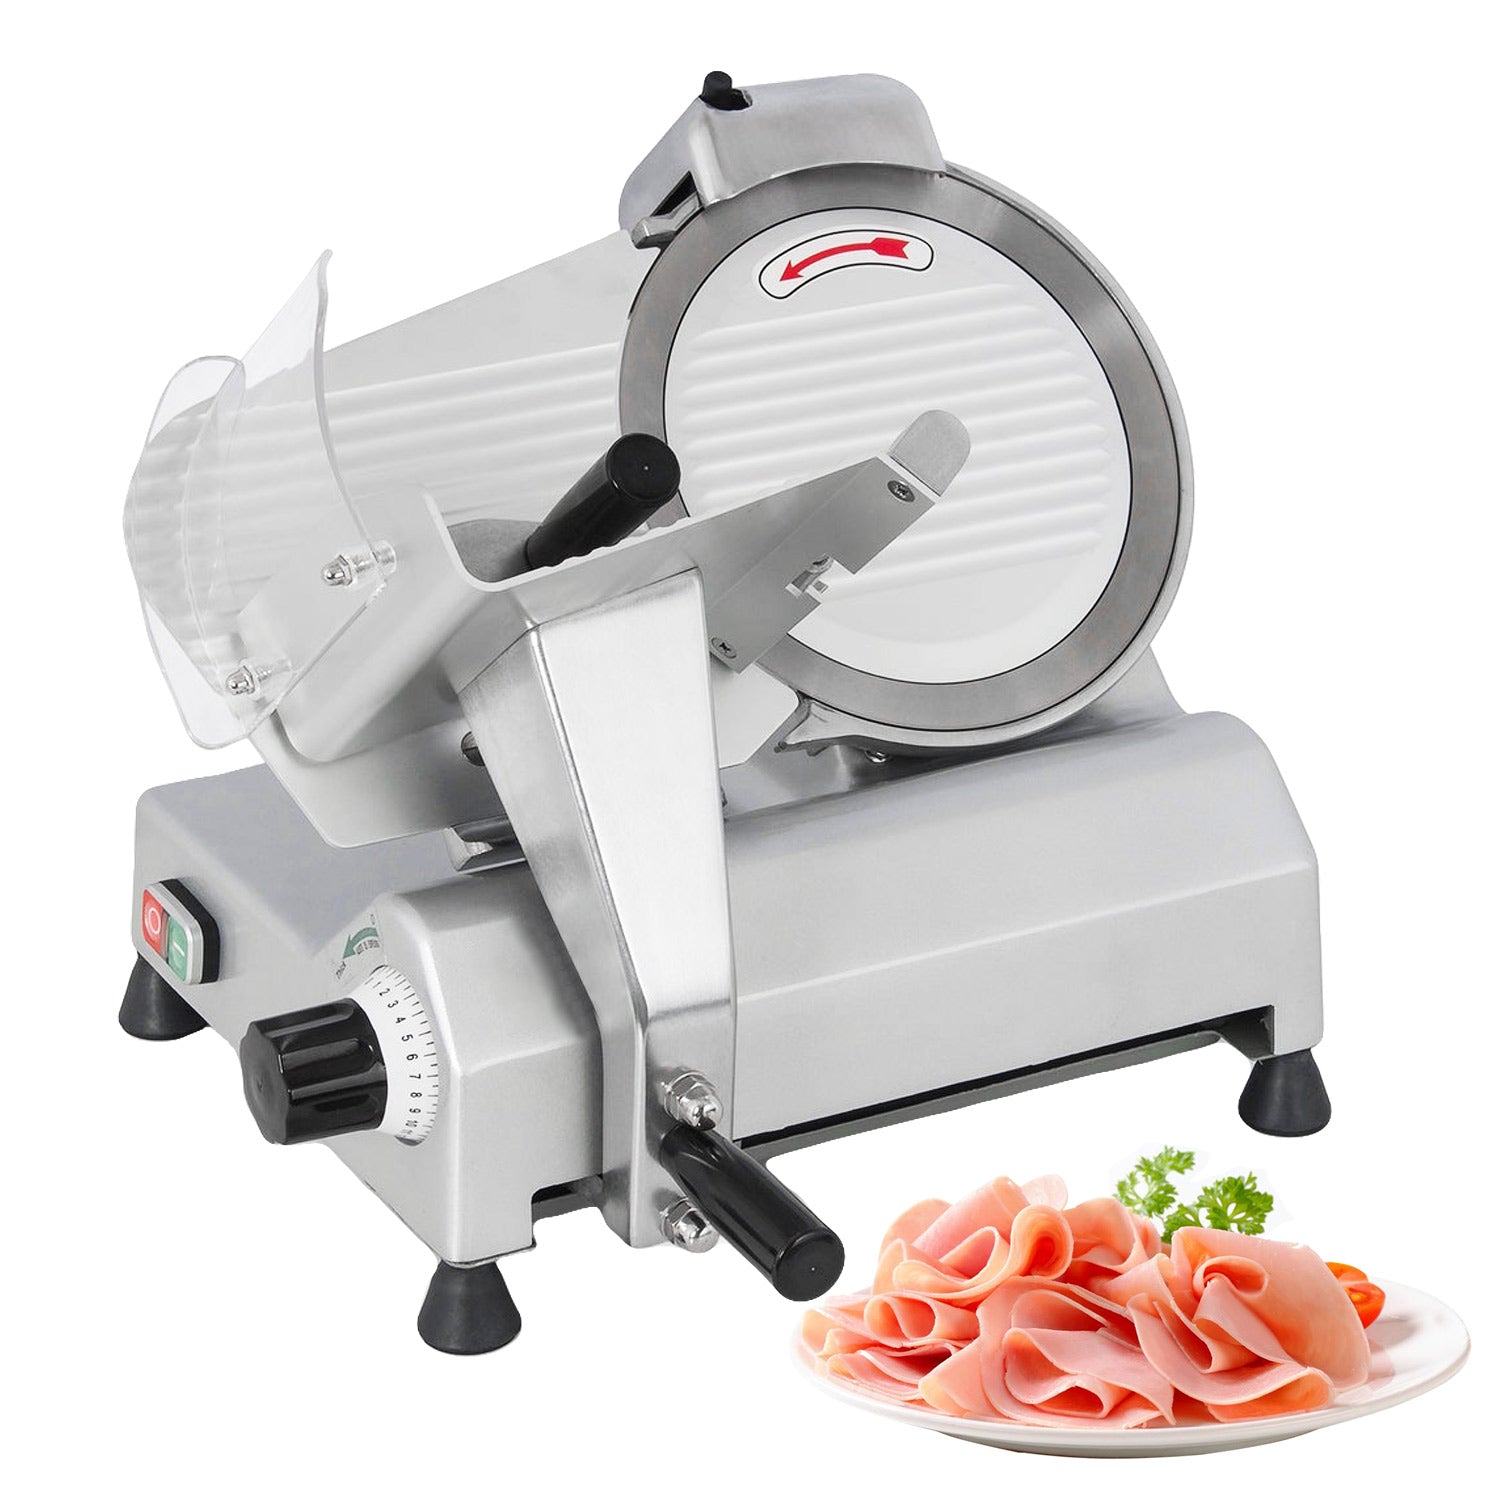 GorillaRock Meat Slicer Commercial | Electric Food Slicer with 10-Inch Stainless Steel Blade | Aluminum Body | Low Noise